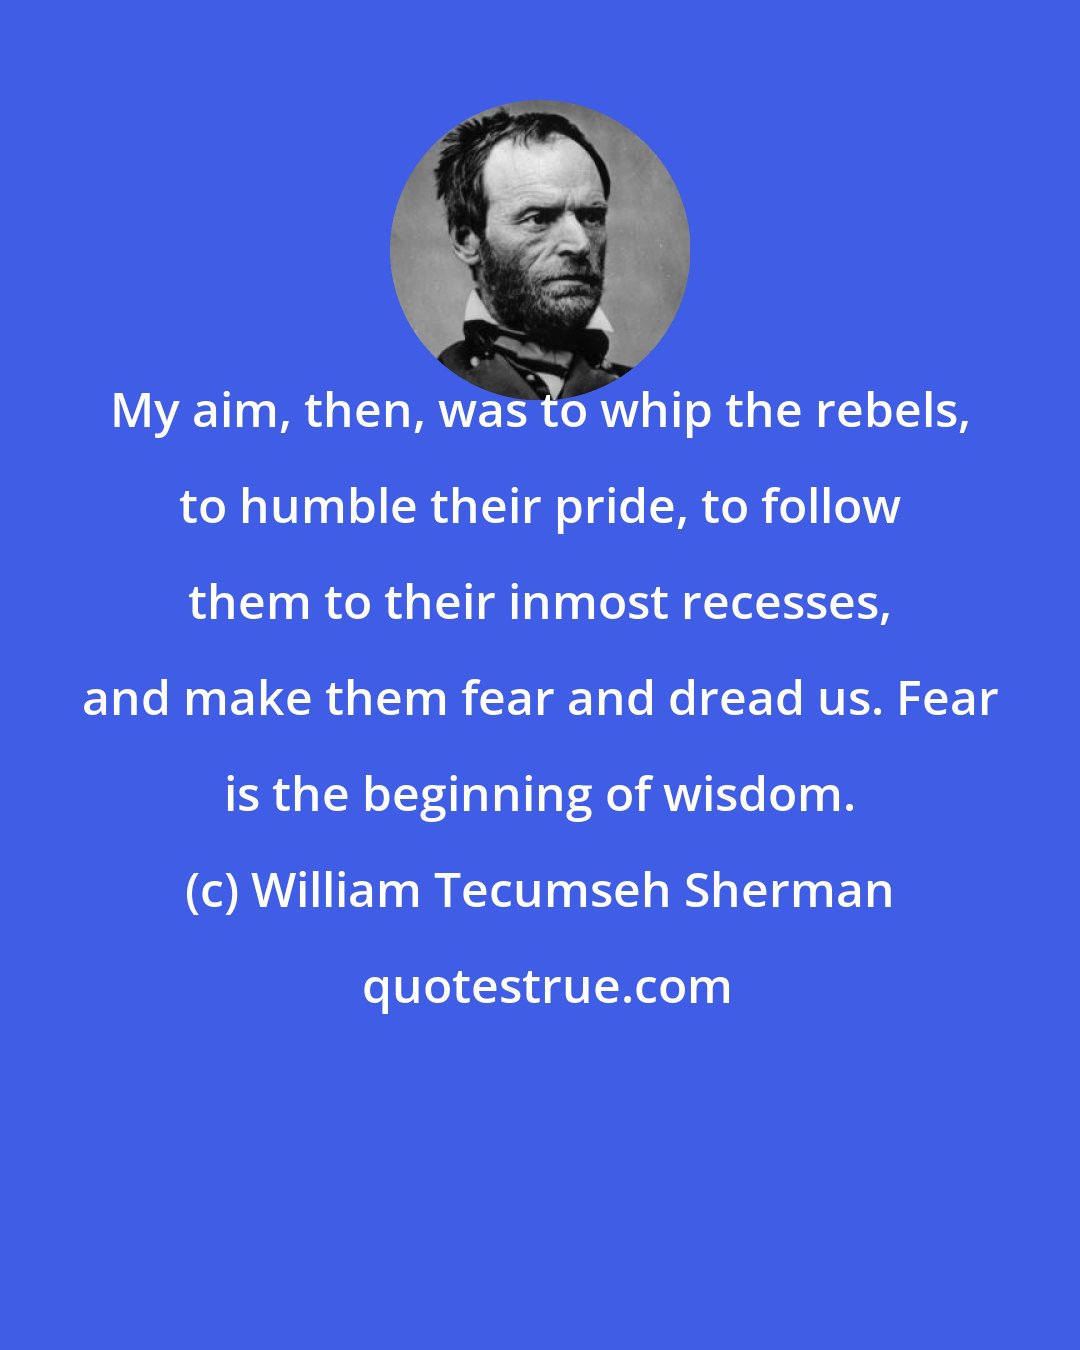 William Tecumseh Sherman: My aim, then, was to whip the rebels, to humble their pride, to follow them to their inmost recesses, and make them fear and dread us. Fear is the beginning of wisdom.